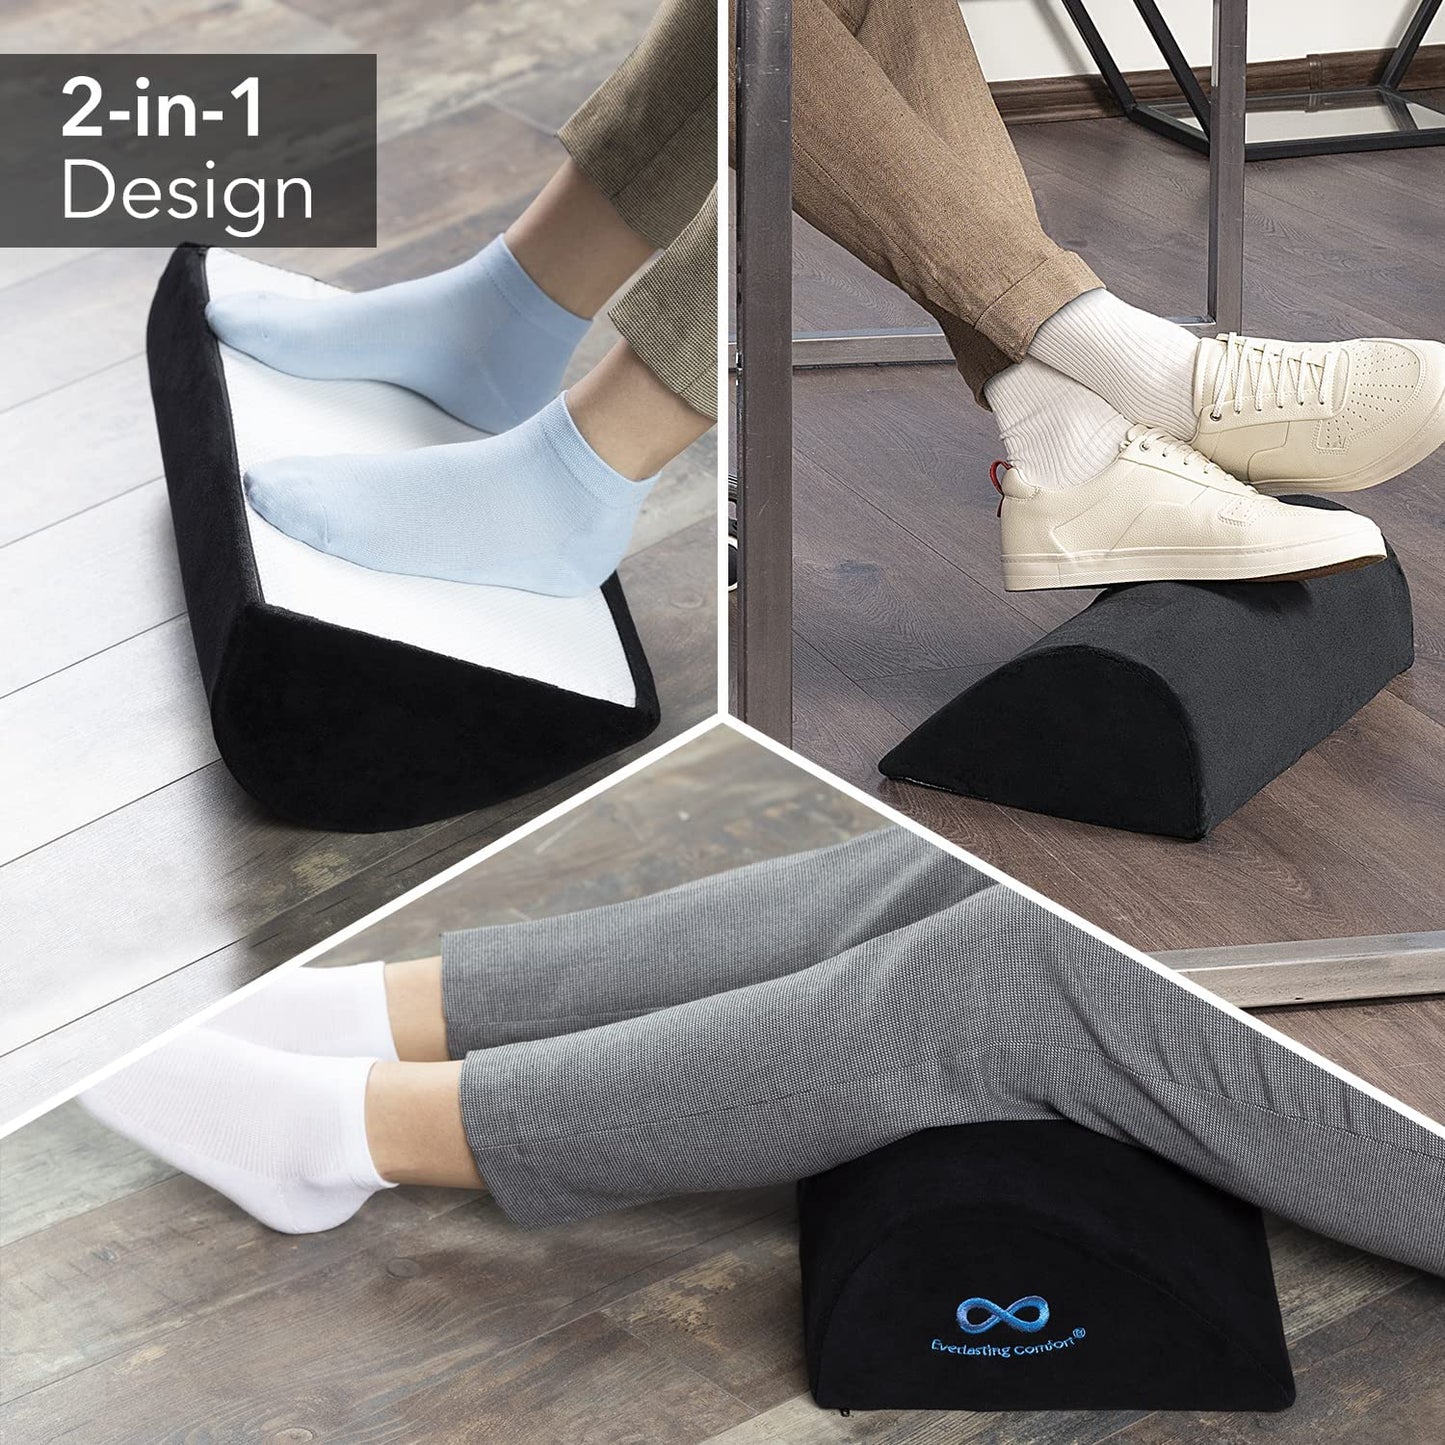 Ergonomic Foot Rest for Under Desk at Work with - Provides All-Day Support and Pain Relief - Ideal for Home Office, Gaming, and More